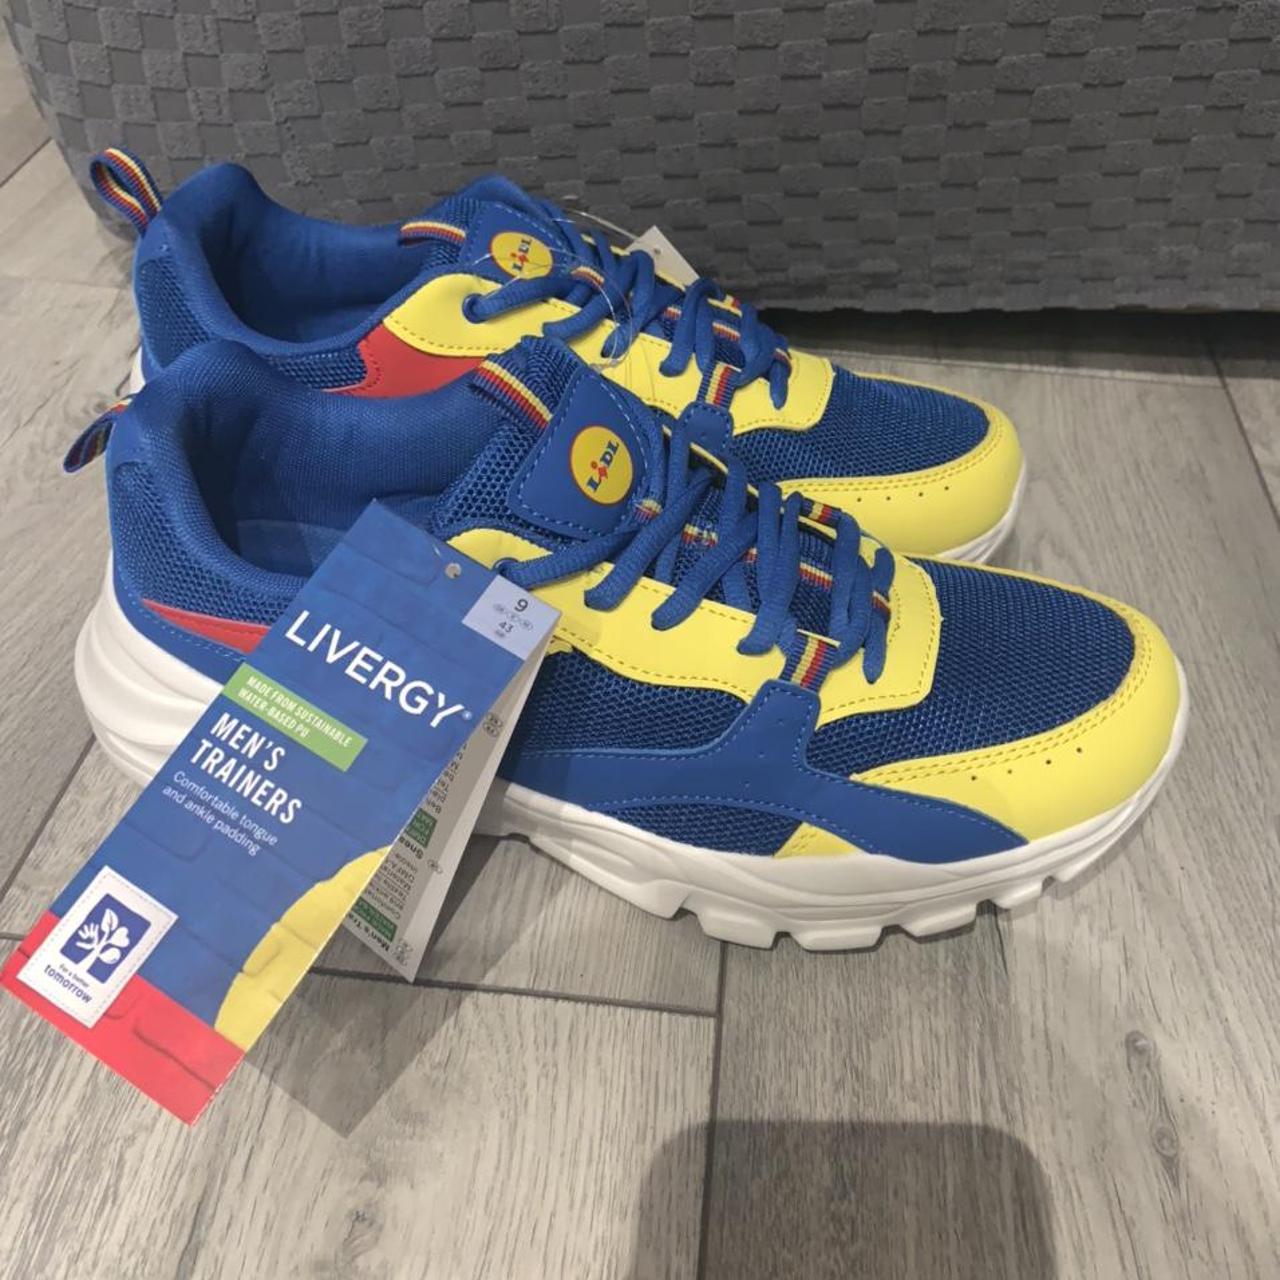 LAST SIZES Lidl Trainers Mens Limited Edition 2023 UPDATED STOCK | eBay